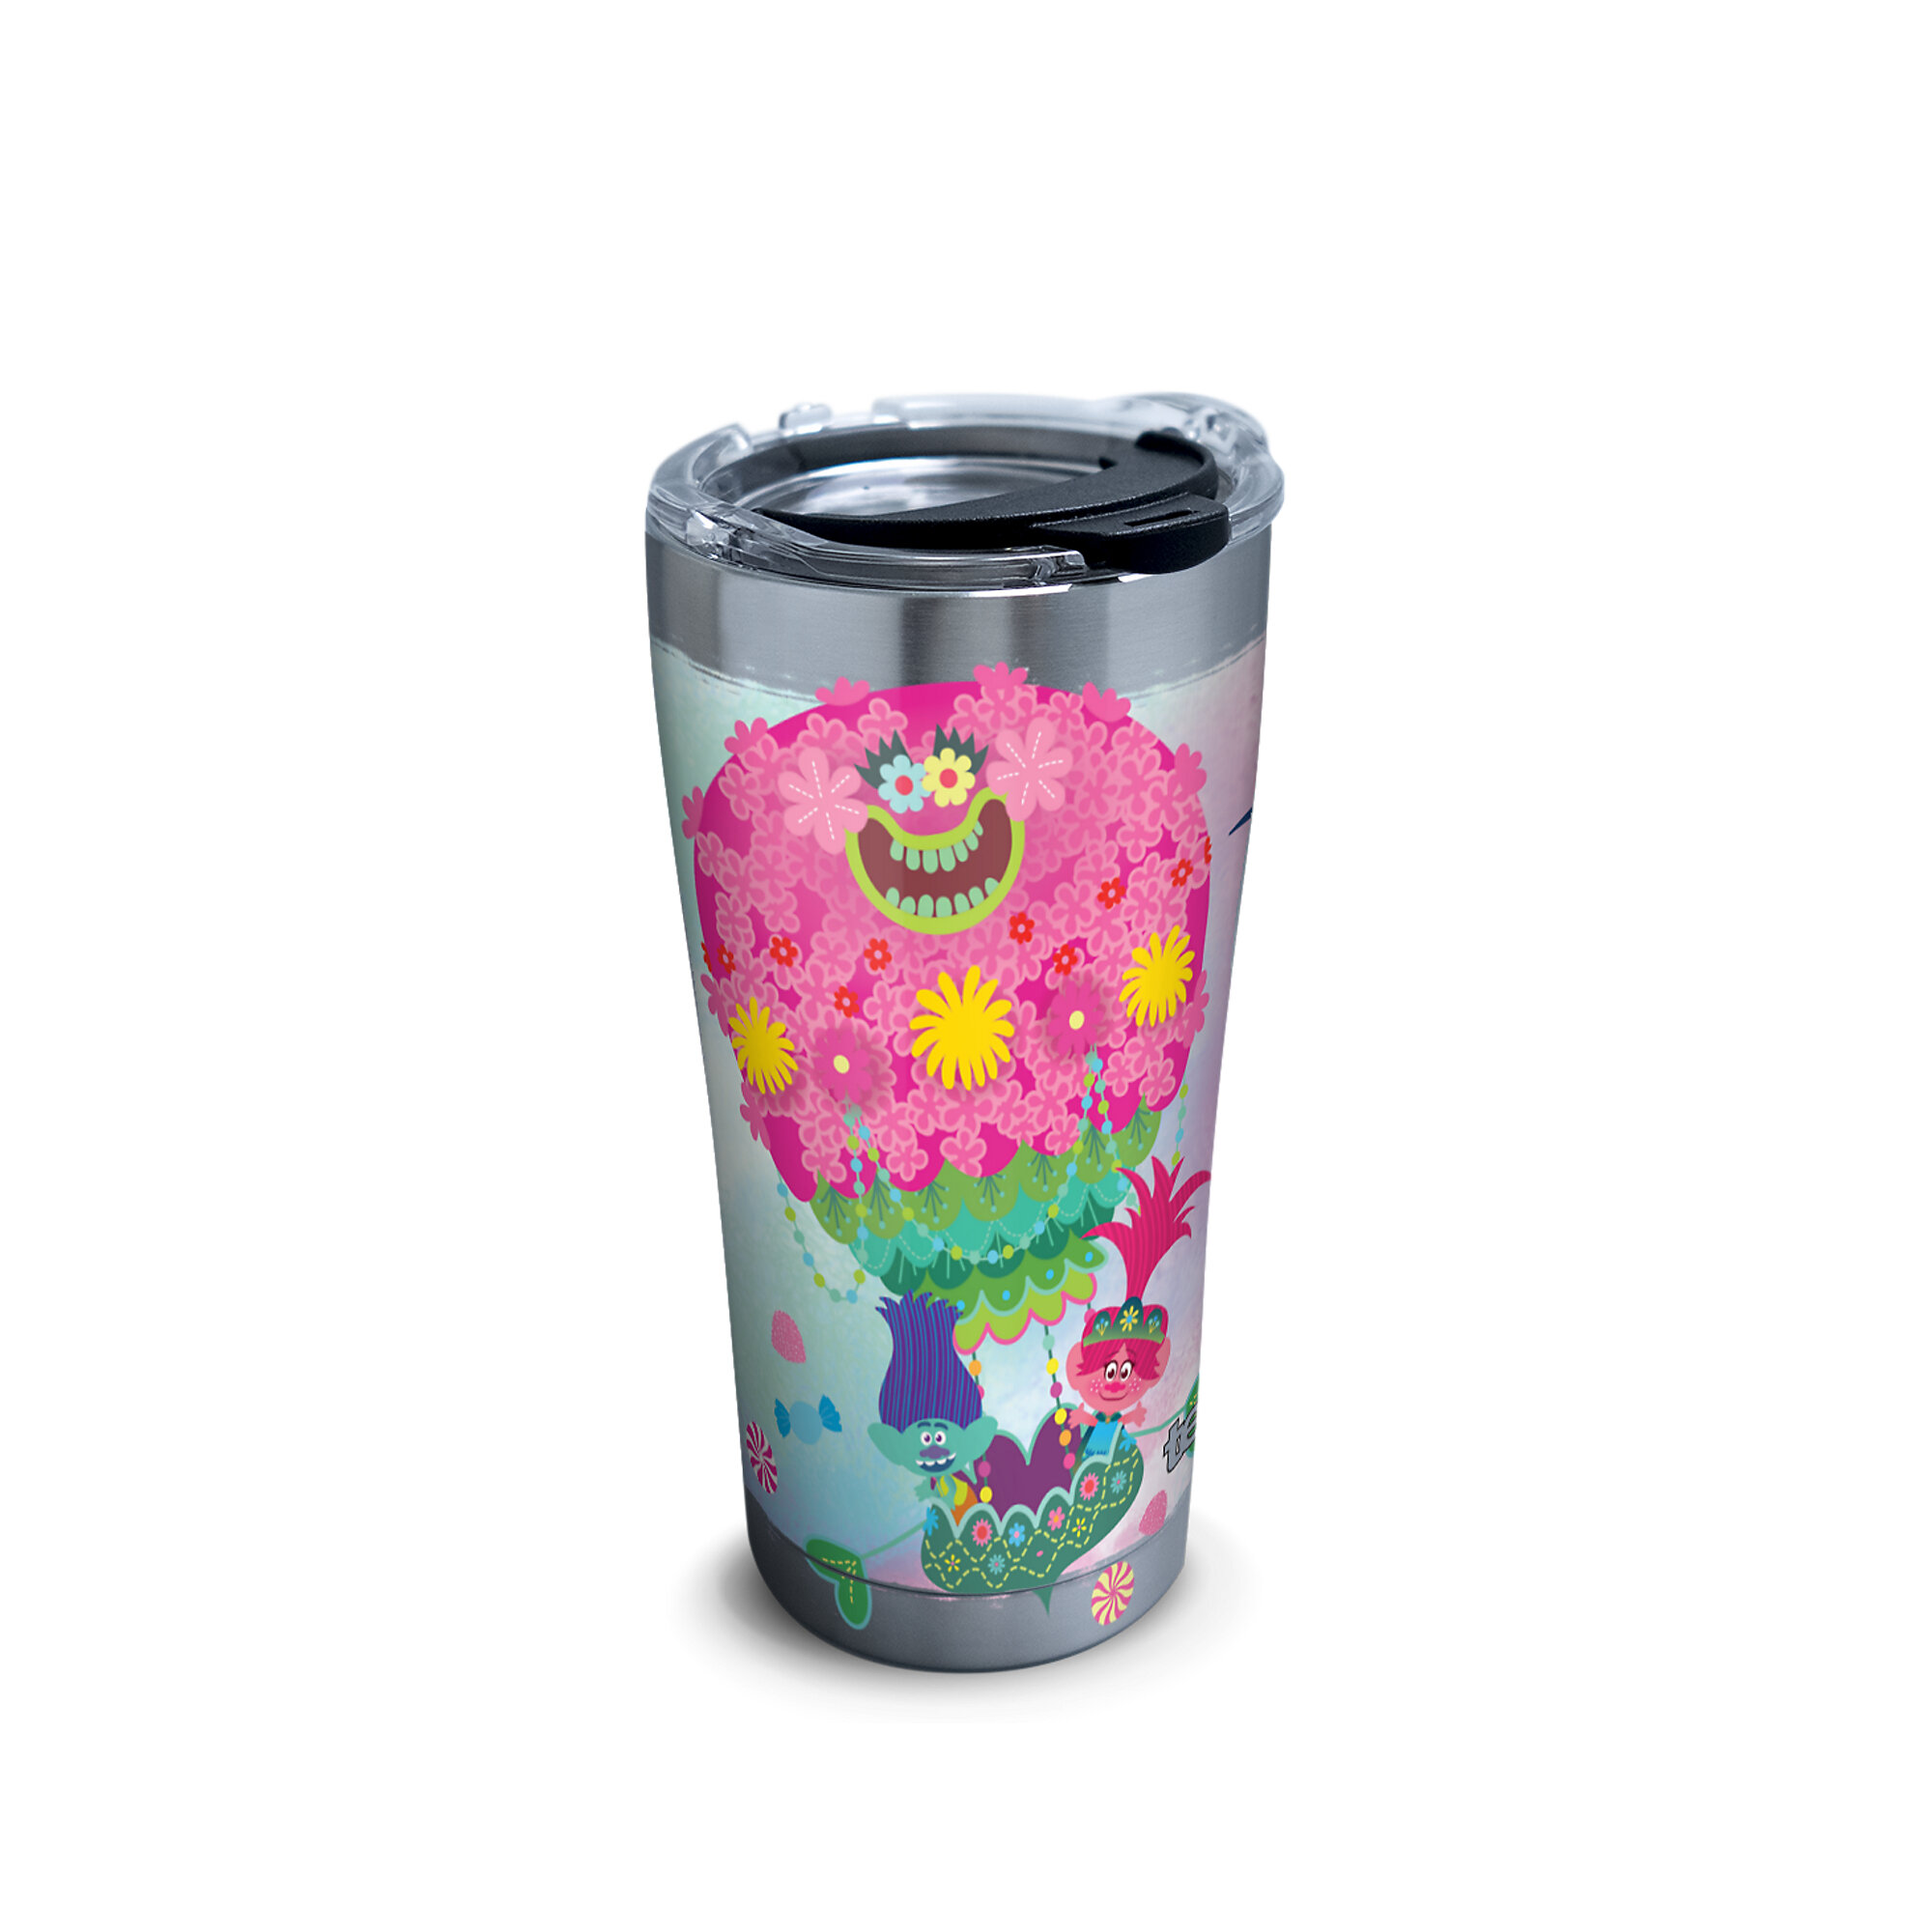 DOG MOM 20 Oz Tervis Stainless Tumbler With Hammer Lid New! 